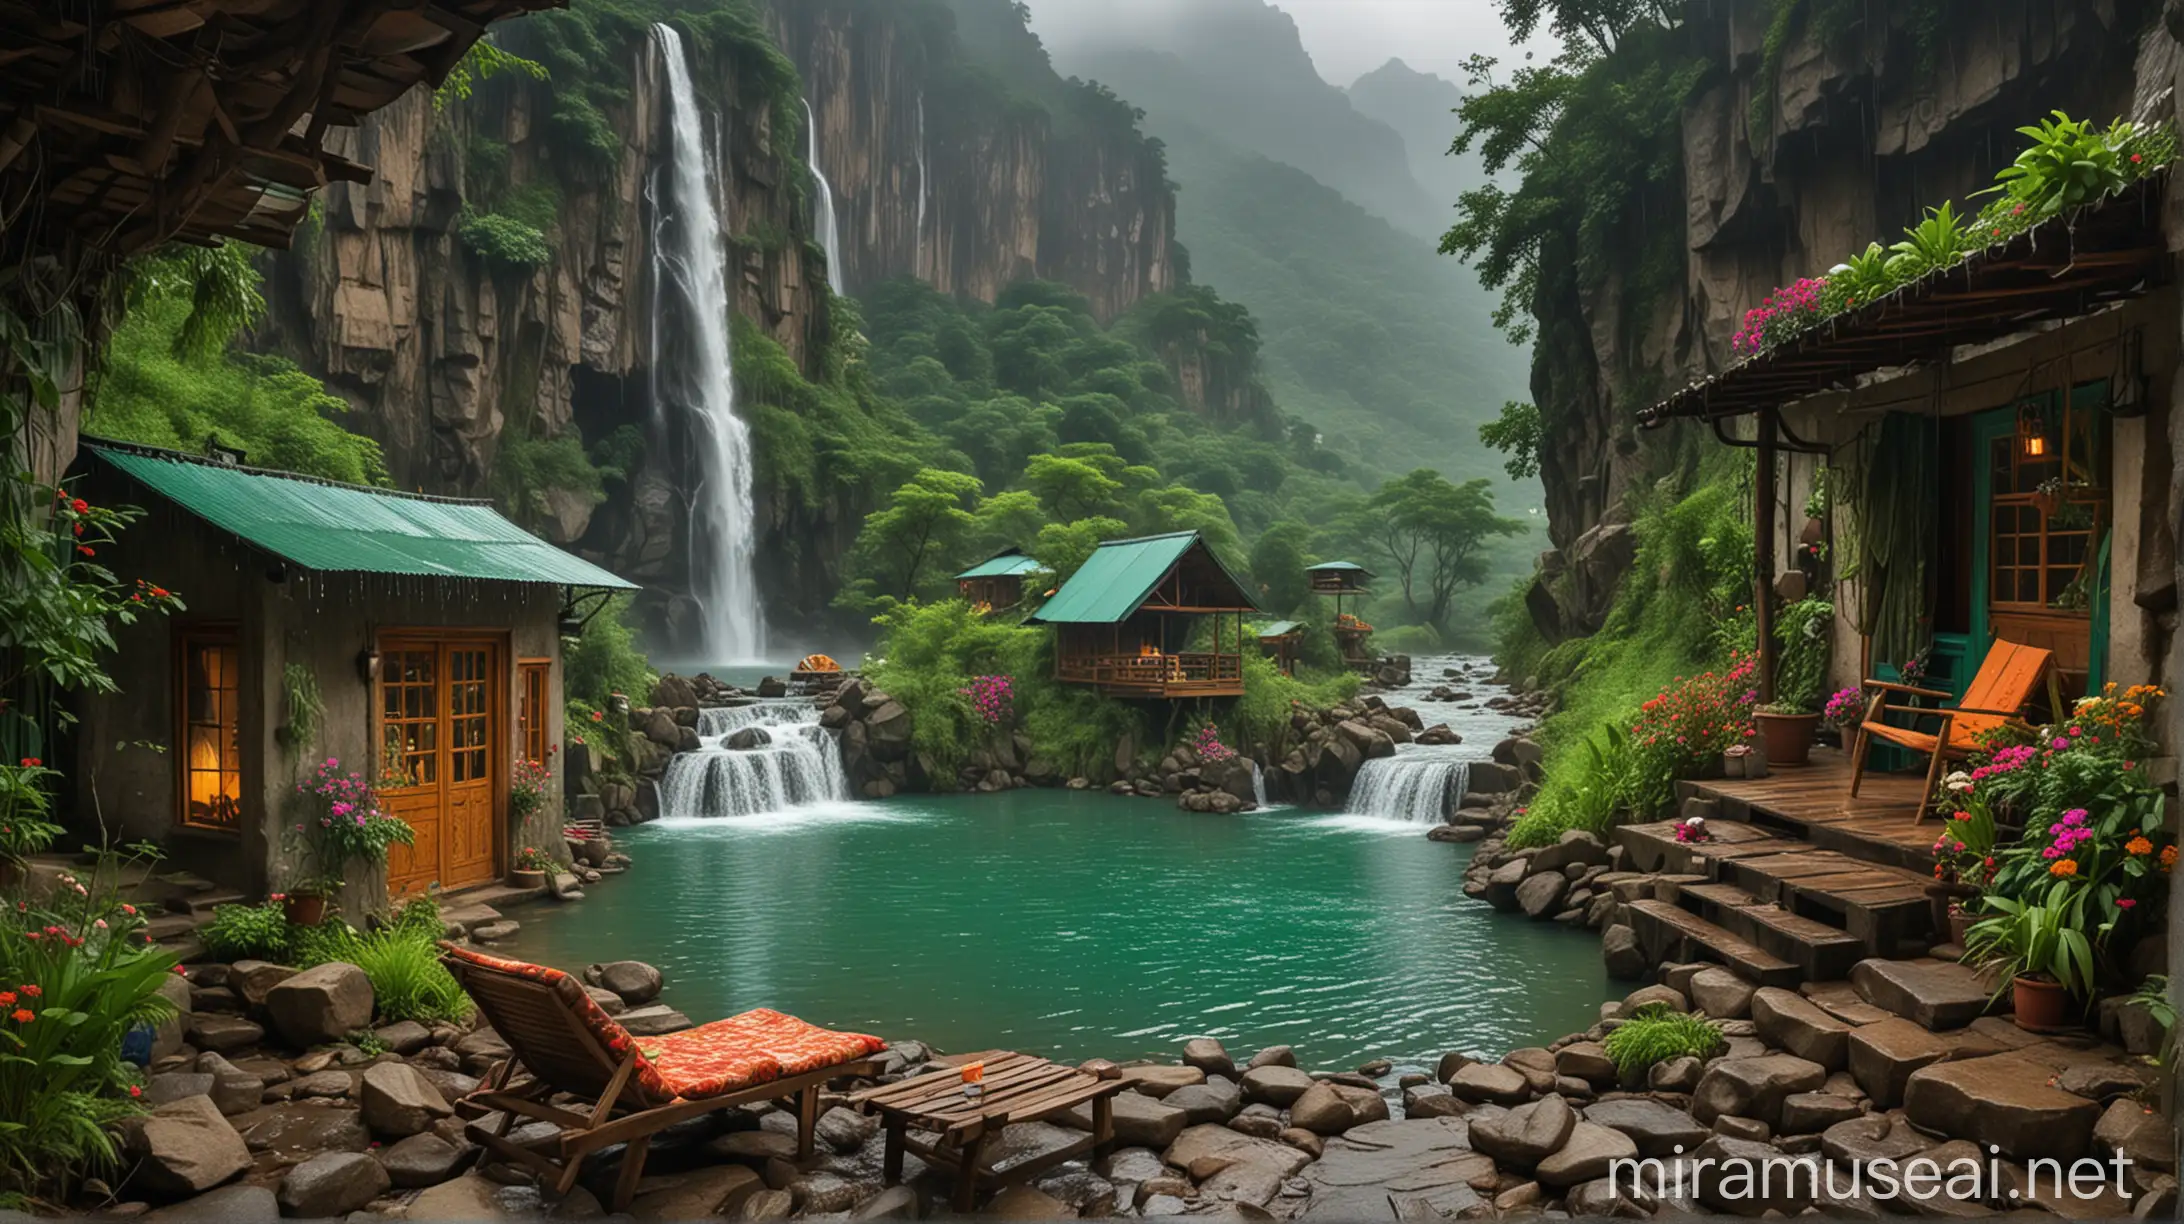 moonsoon house at mountain flowers and waterfall and sitting chairs a woman Sleeping 
in sitting chairs waterfall with a hut and a lake, in the style of 32k uhd, moonsoon emerald and green, colorful dreams, romantic riverscapes, beautiful scenery mountain waterfall sia view rainy weather monsoon